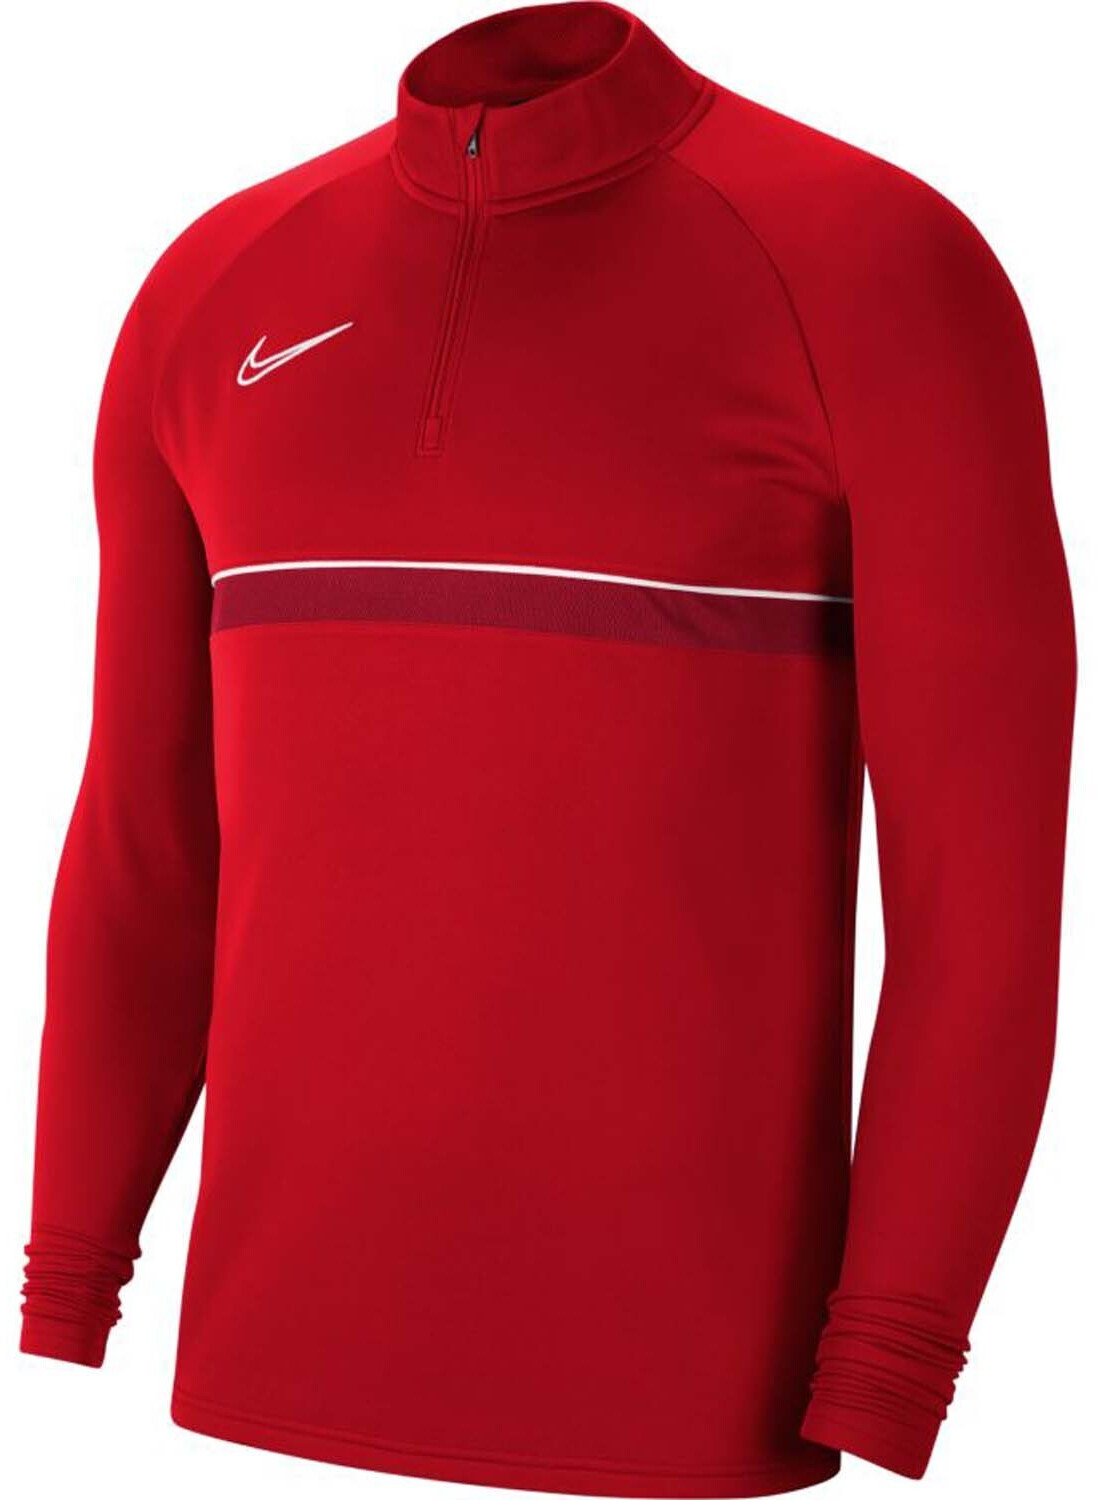 Photos - Football Kit Nike Dri-FIT Academy Football Top Youth  university red/white (CW6112)